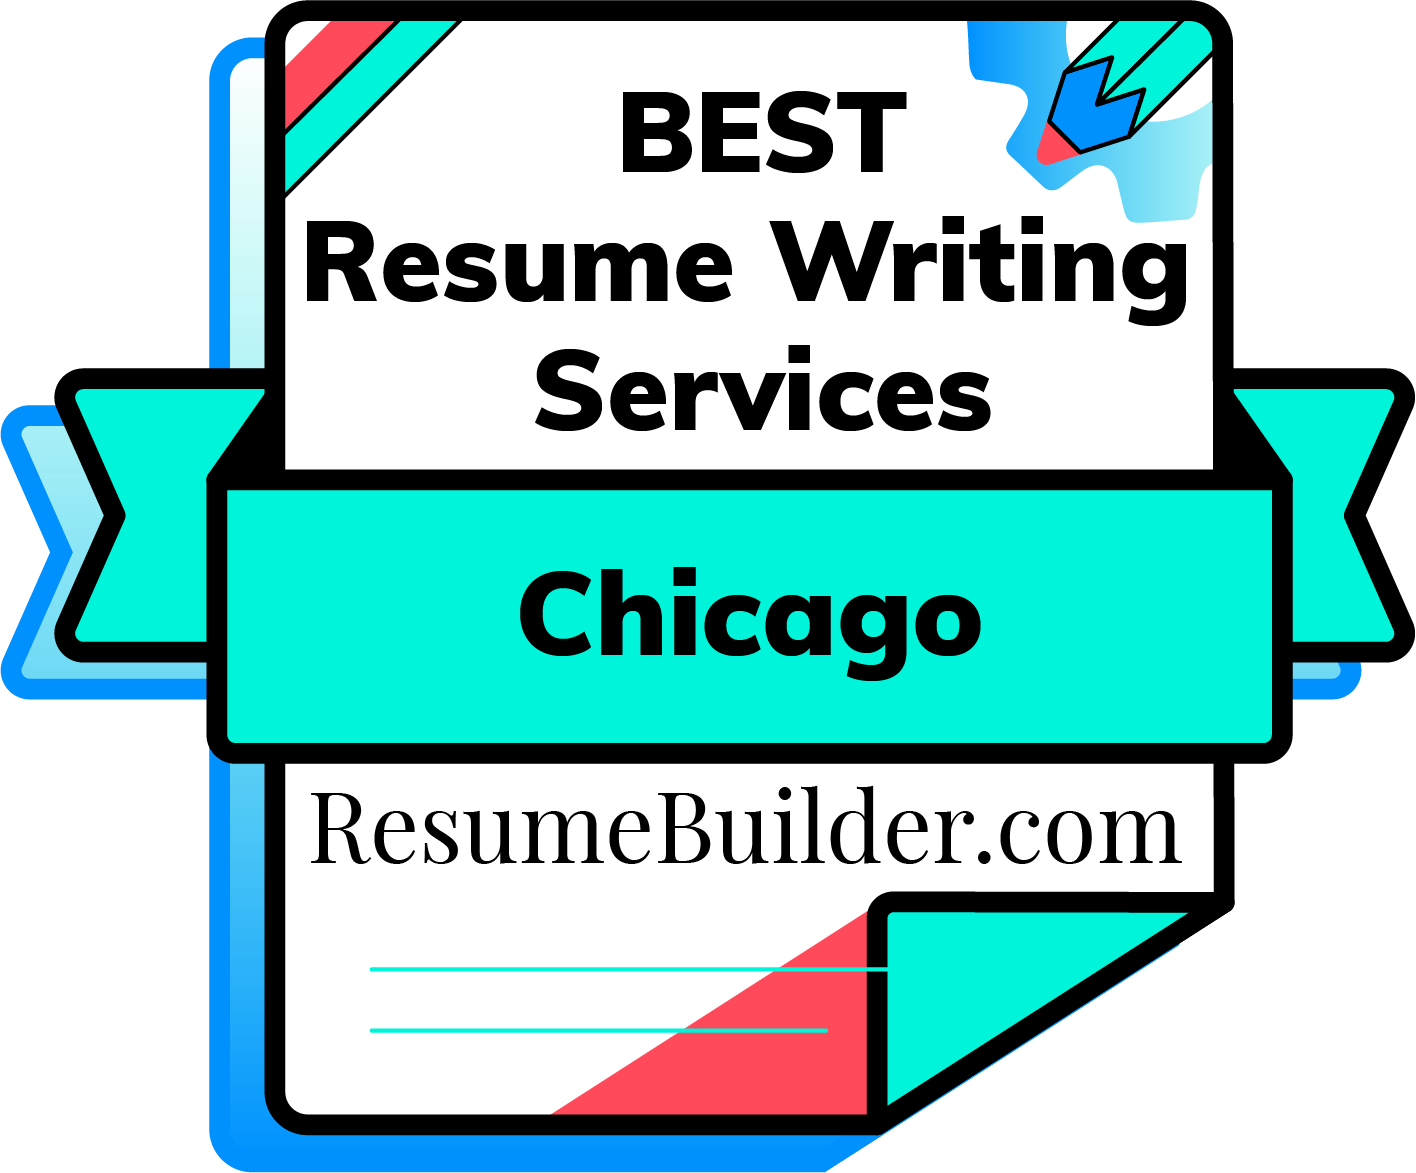 Resume writing services chicago